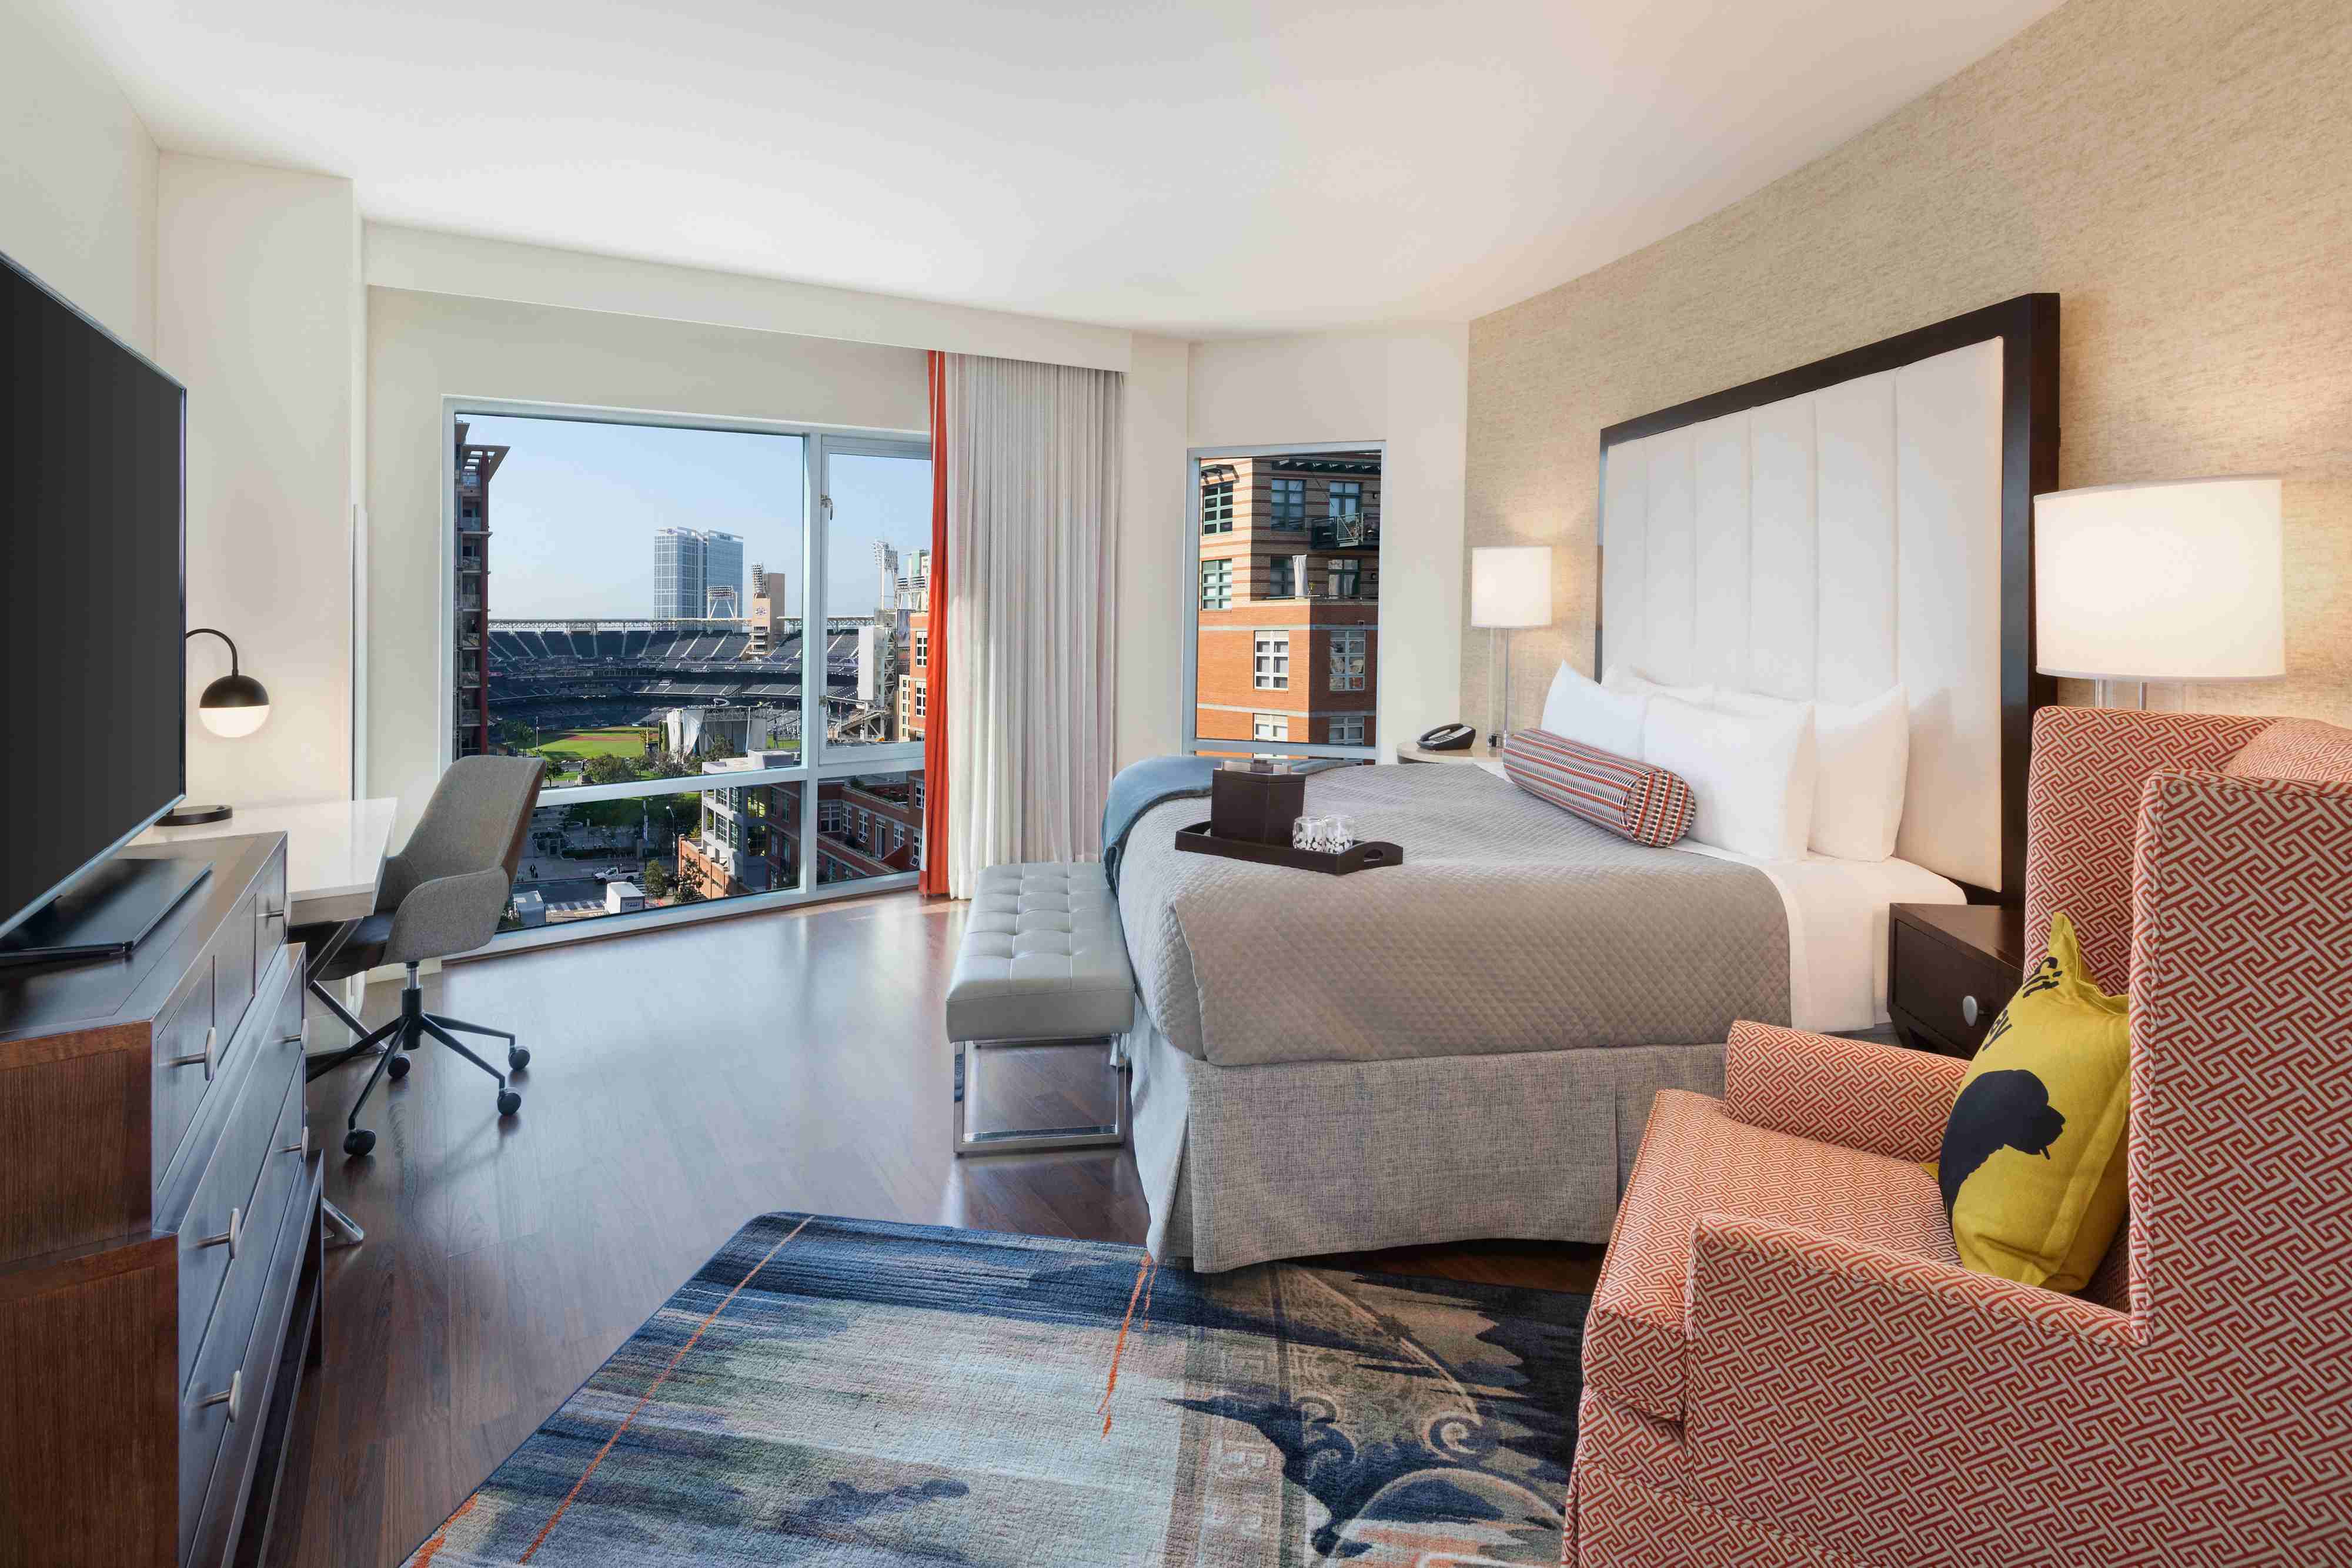 Guest room with view of the Padres Baseball Stadium